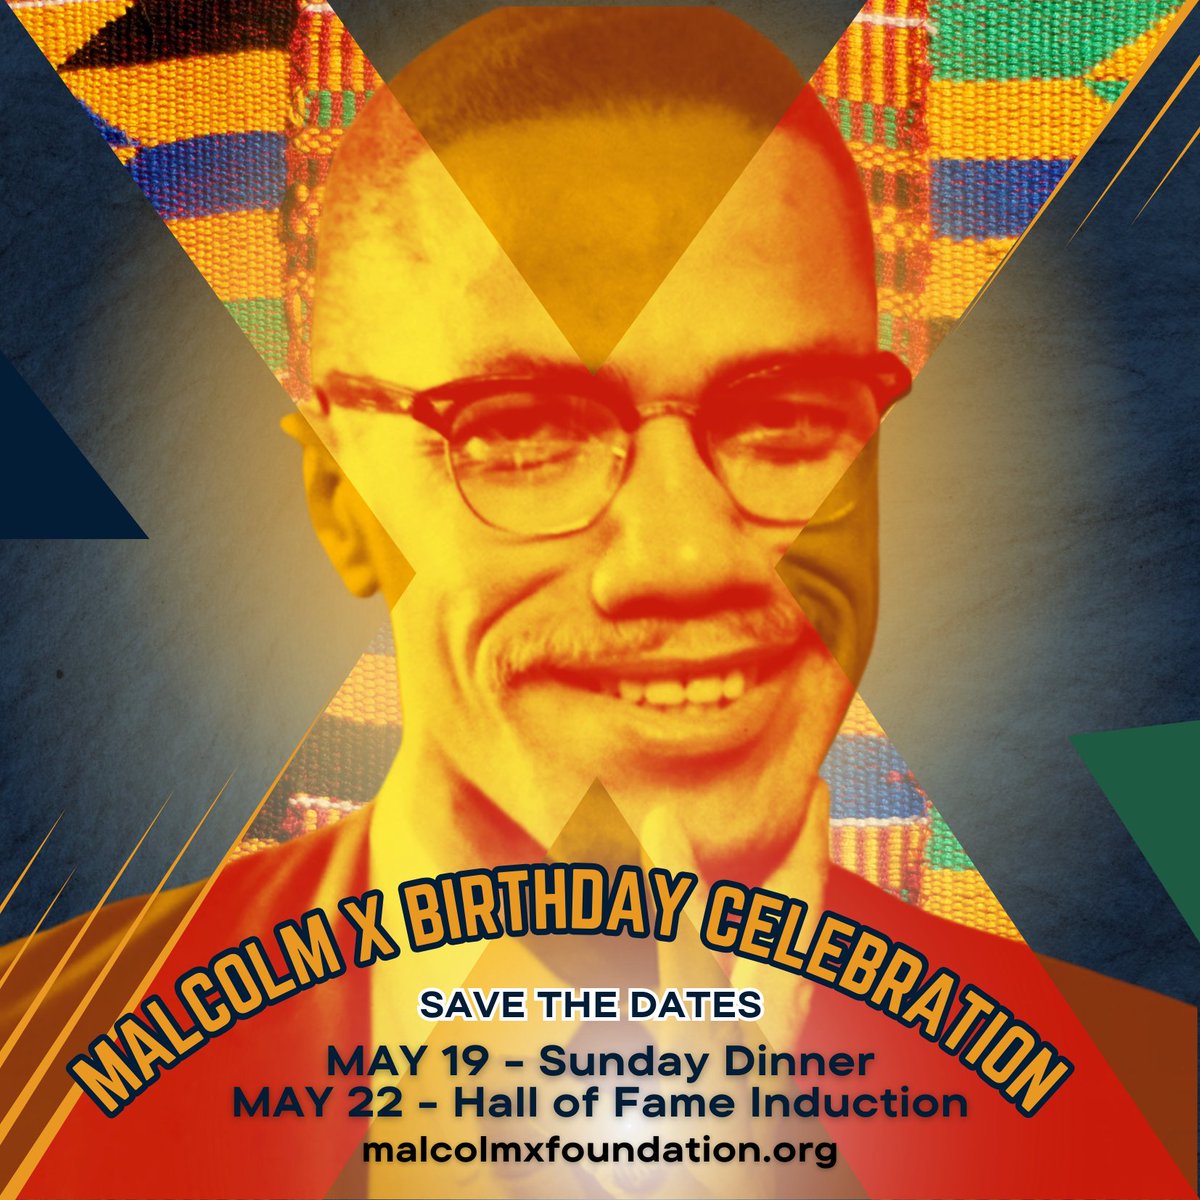 40 days away from our annual Malcolm X Birthday Celebration - This year hosting 2 events! May 19th & May 22nd, Save the Dates, more details to be shared soon!